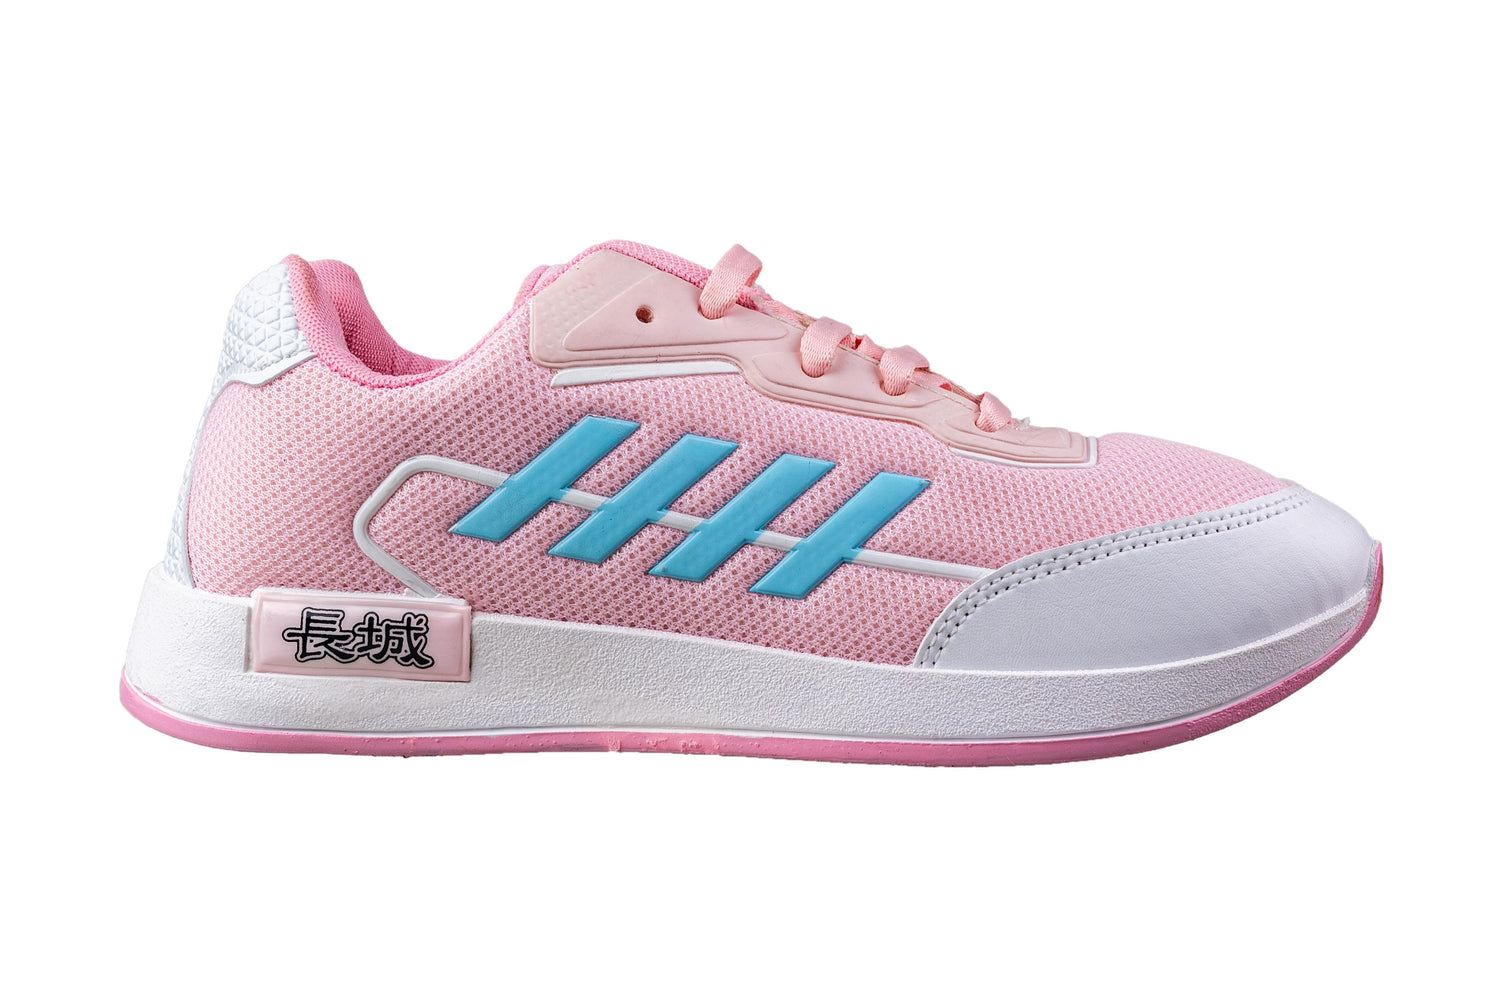 Camps Ladies Pink Sports Shoe